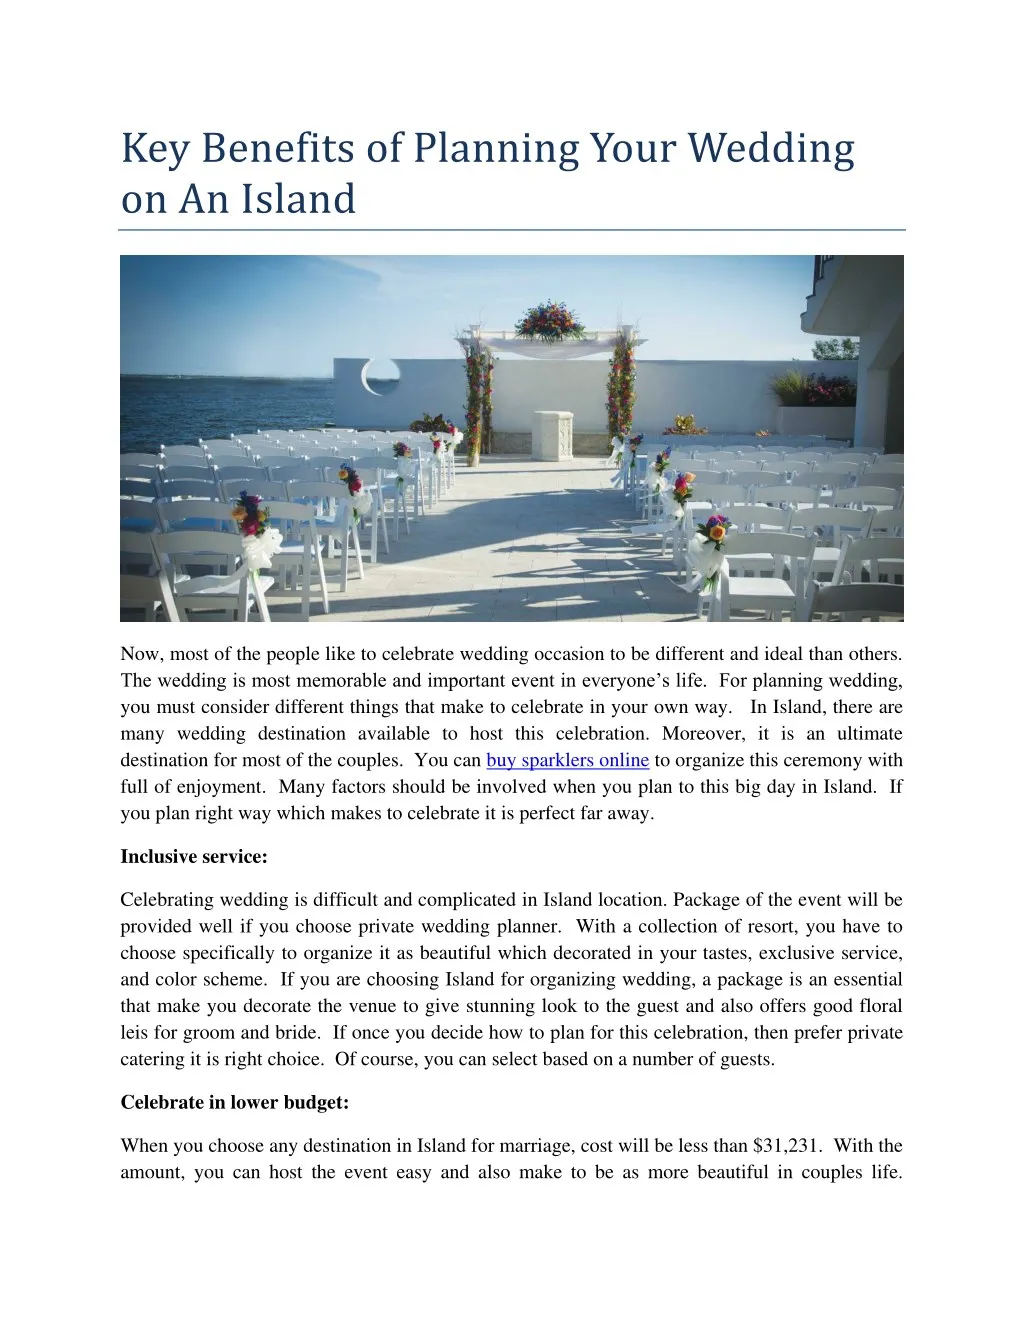 key benefits of planning your wedding on an island